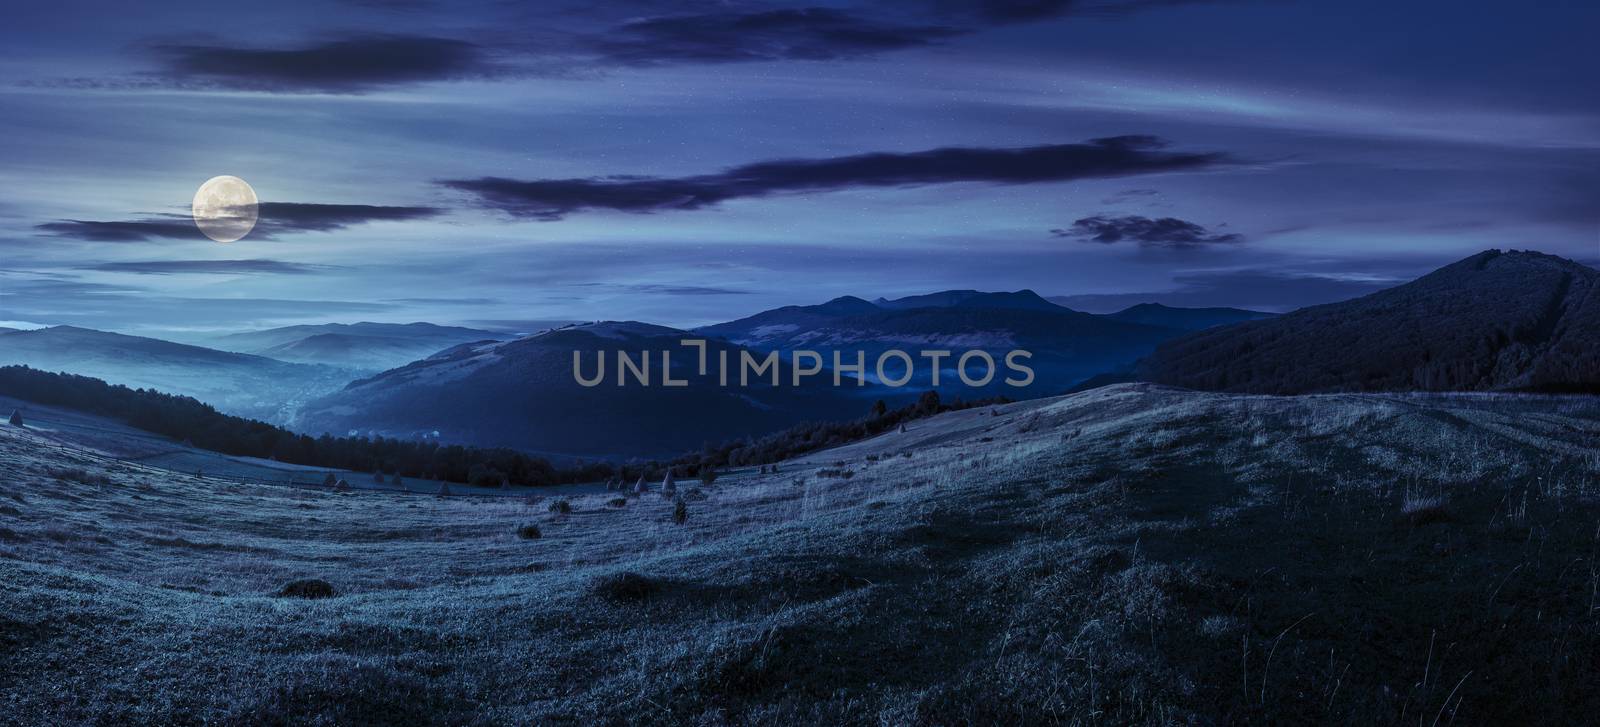 agricultural field on hillside in mountains near village at night in full moon light